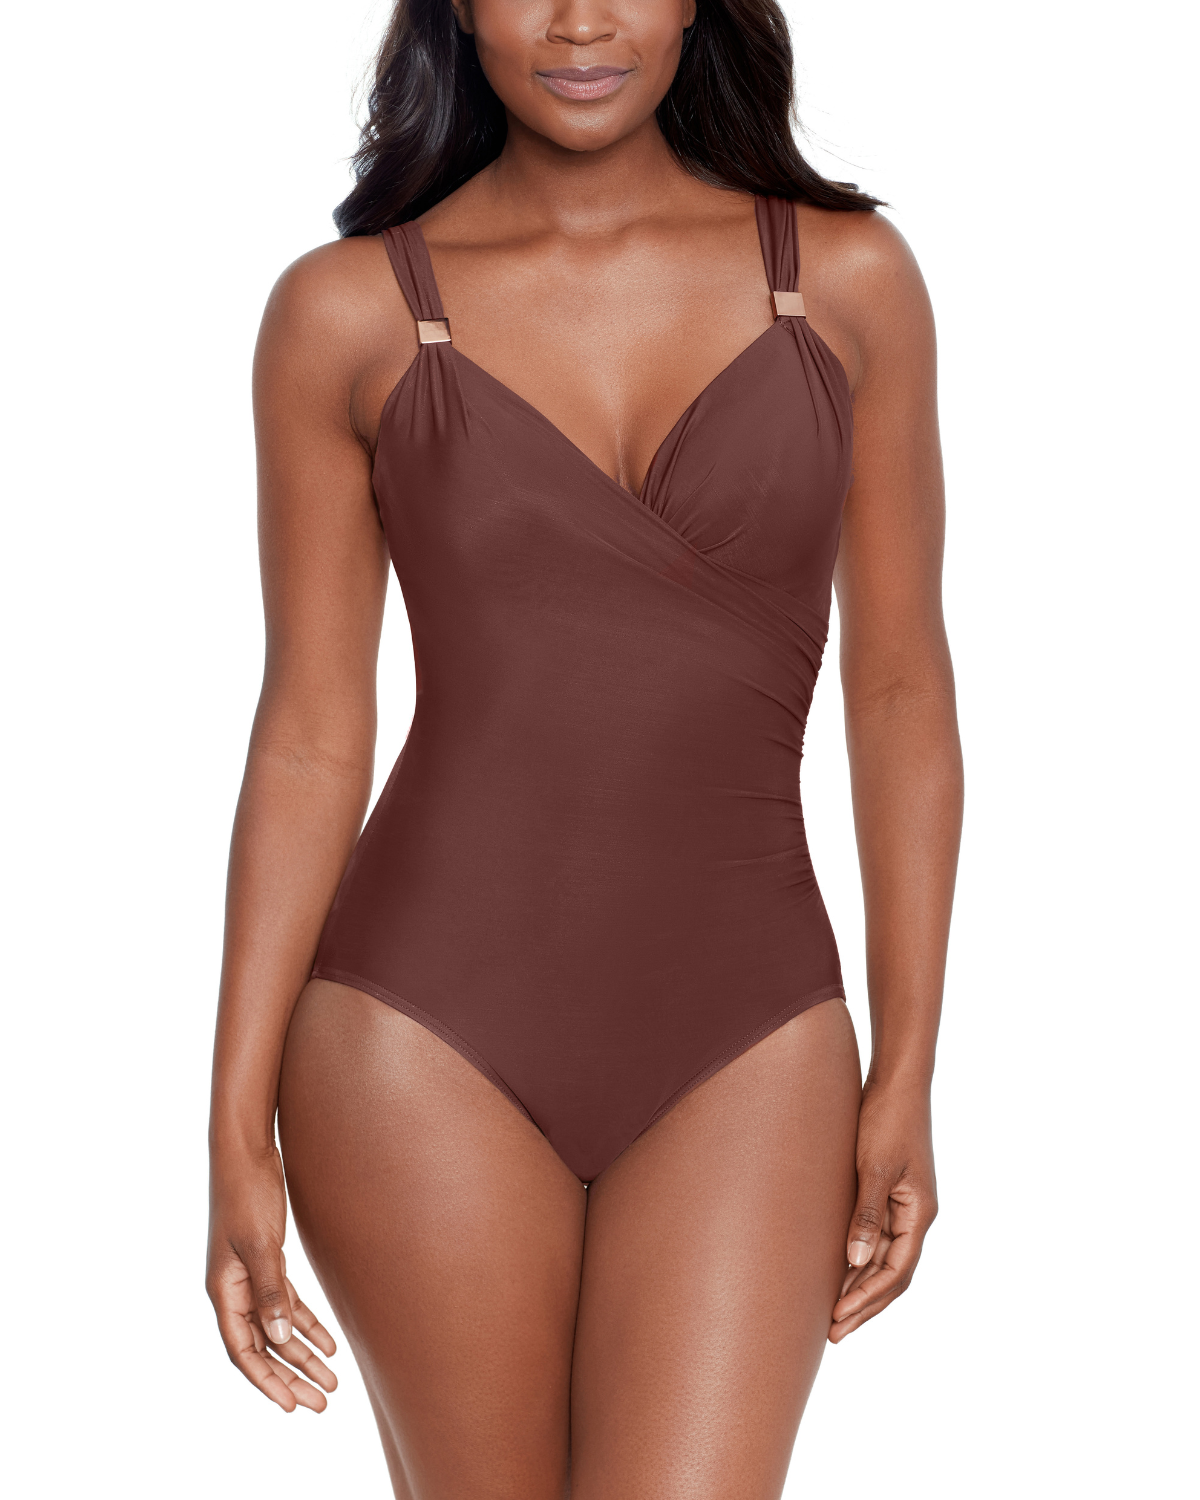 Model wearing a one piece swimsuit with a sweetheart neckline and hidden underwire in brown